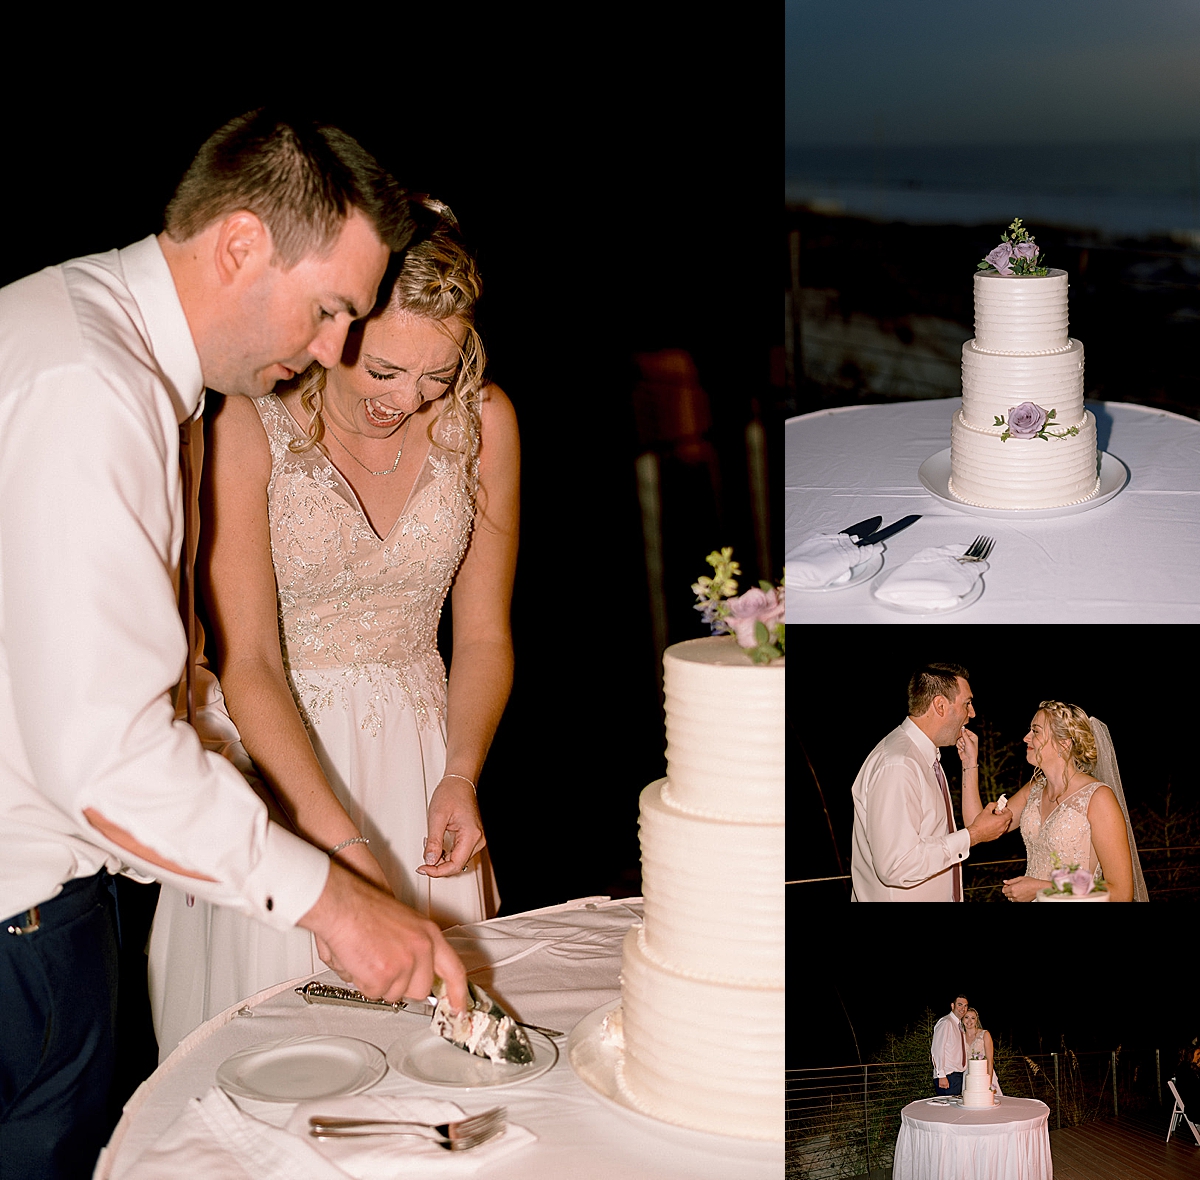 newly married couple cut wedding cake at reception by Emily burns photo